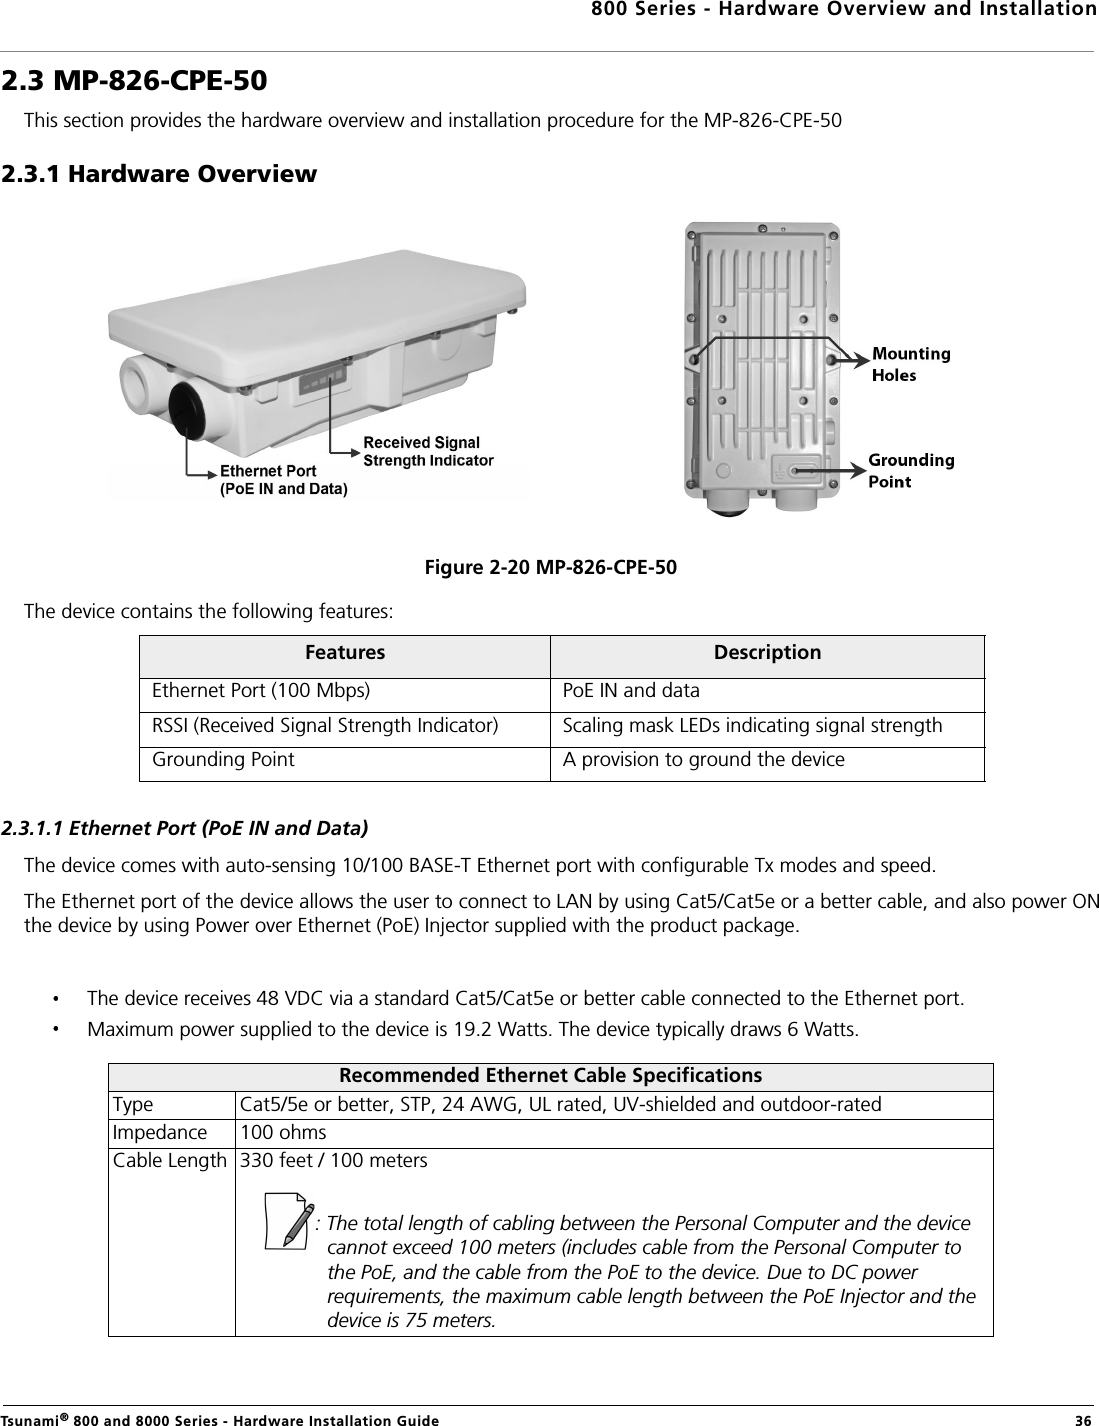 800 Series - Hardware Overview and InstallationTsunami® 800 and 8000 Series - Hardware Installation Guide  362.3 MP-826-CPE-50This section provides the hardware overview and installation procedure for the MP-826-CPE-502.3.1 Hardware OverviewFigure 2-20 MP-826-CPE-50The device contains the following features:2.3.1.1 Ethernet Port (PoE IN and Data)The device comes with auto-sensing 10/100 BASE-T Ethernet port with configurable Tx modes and speed.The Ethernet port of the device allows the user to connect to LAN by using Cat5/Cat5e or a better cable, and also power ONthe device by using Power over Ethernet (PoE) Injector supplied with the product package.The device receives 48 VDC via a standard Cat5/Cat5e or better cable connected to the Ethernet port.Maximum power supplied to the device is 19.2 Watts. The device typically draws 6 Watts.Features DescriptionEthernet Port (100 Mbps) PoE IN and dataRSSI (Received Signal Strength Indicator) Scaling mask LEDs indicating signal strengthGrounding Point A provision to ground the deviceRecommended Ethernet Cable SpecificationsType Cat5/5e or better, STP, 24 AWG, UL rated, UV-shielded and outdoor-ratedImpedance 100 ohmsCable Length 330 feet / 100 meters: The total length of cabling between the Personal Computer and the device cannot exceed 100 meters (includes cable from the Personal Computer to the PoE, and the cable from the PoE to the device. Due to DC power requirements, the maximum cable length between the PoE Injector and the device is 75 meters.